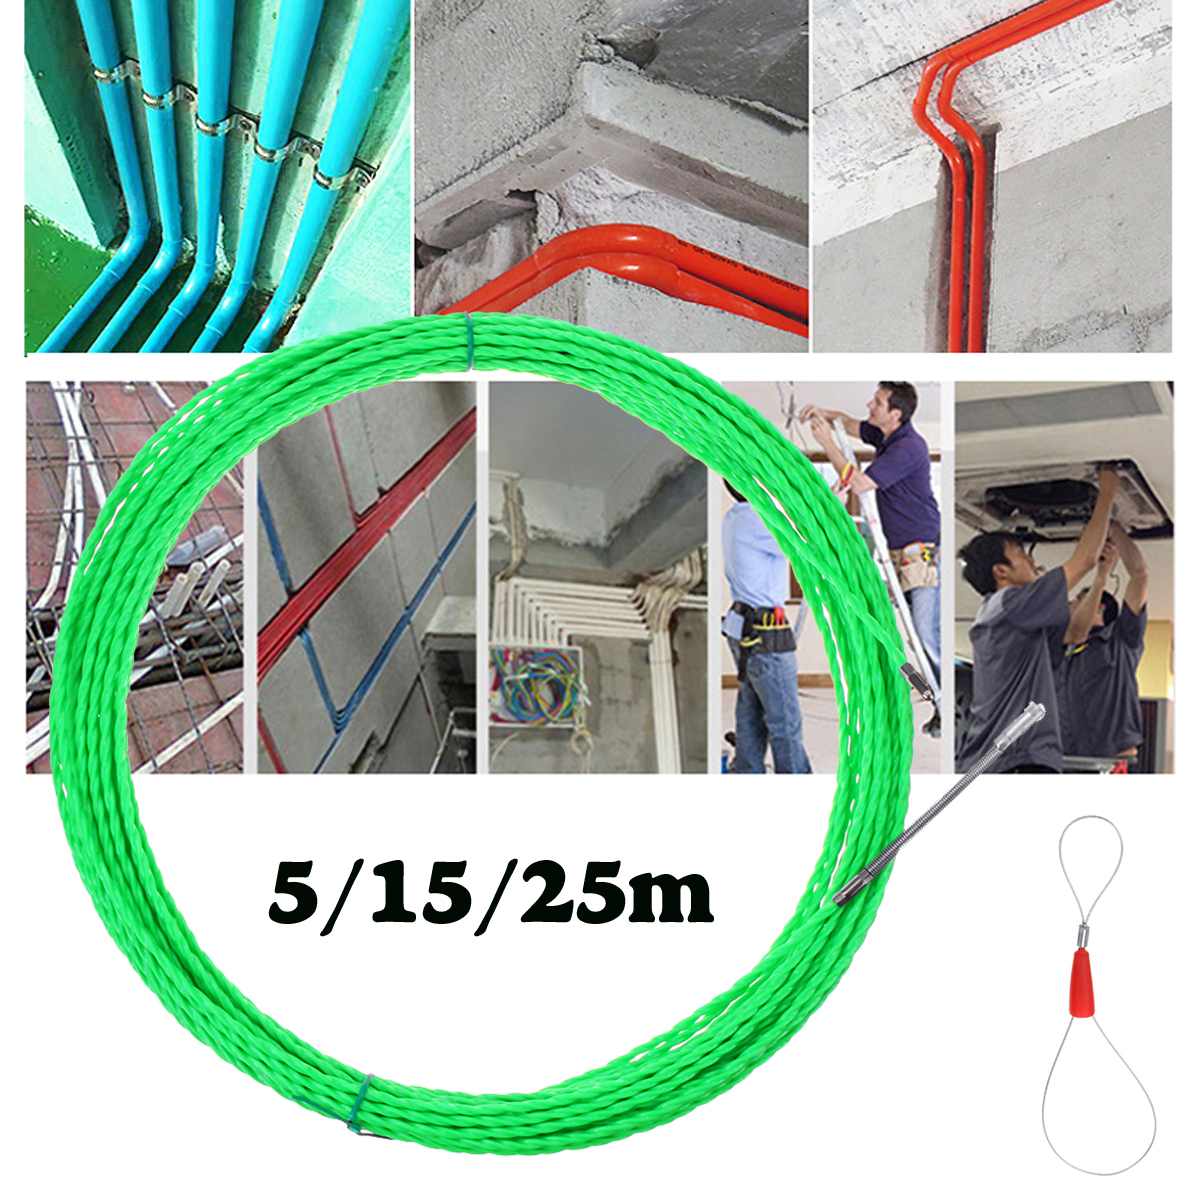 4mm 5m/15m/25m Fiberglass Cable Push Pullers Duct Snake Rodder Fish Tape Wire POM Fish Draw Tape Electrical Cable Puller